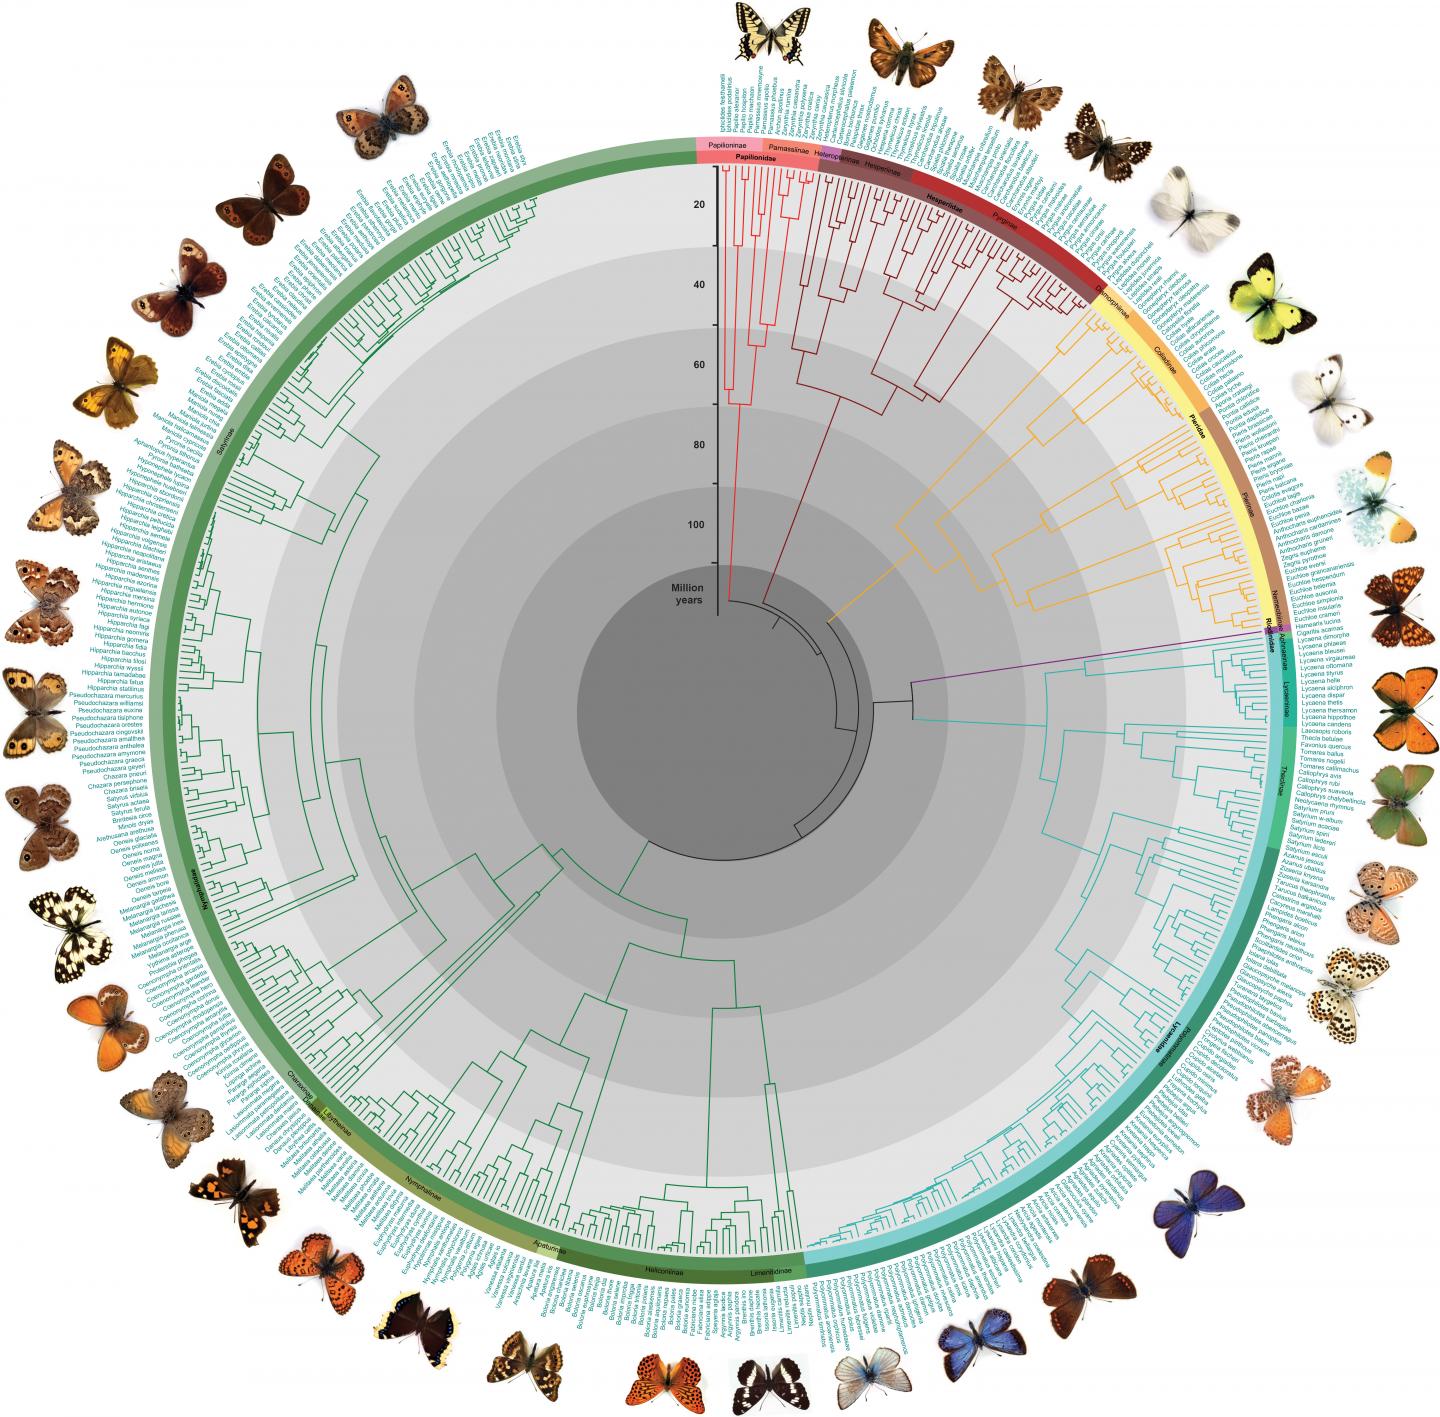 Relationships of the 496 Extant European Butterflies Over the Last 100 Million Years